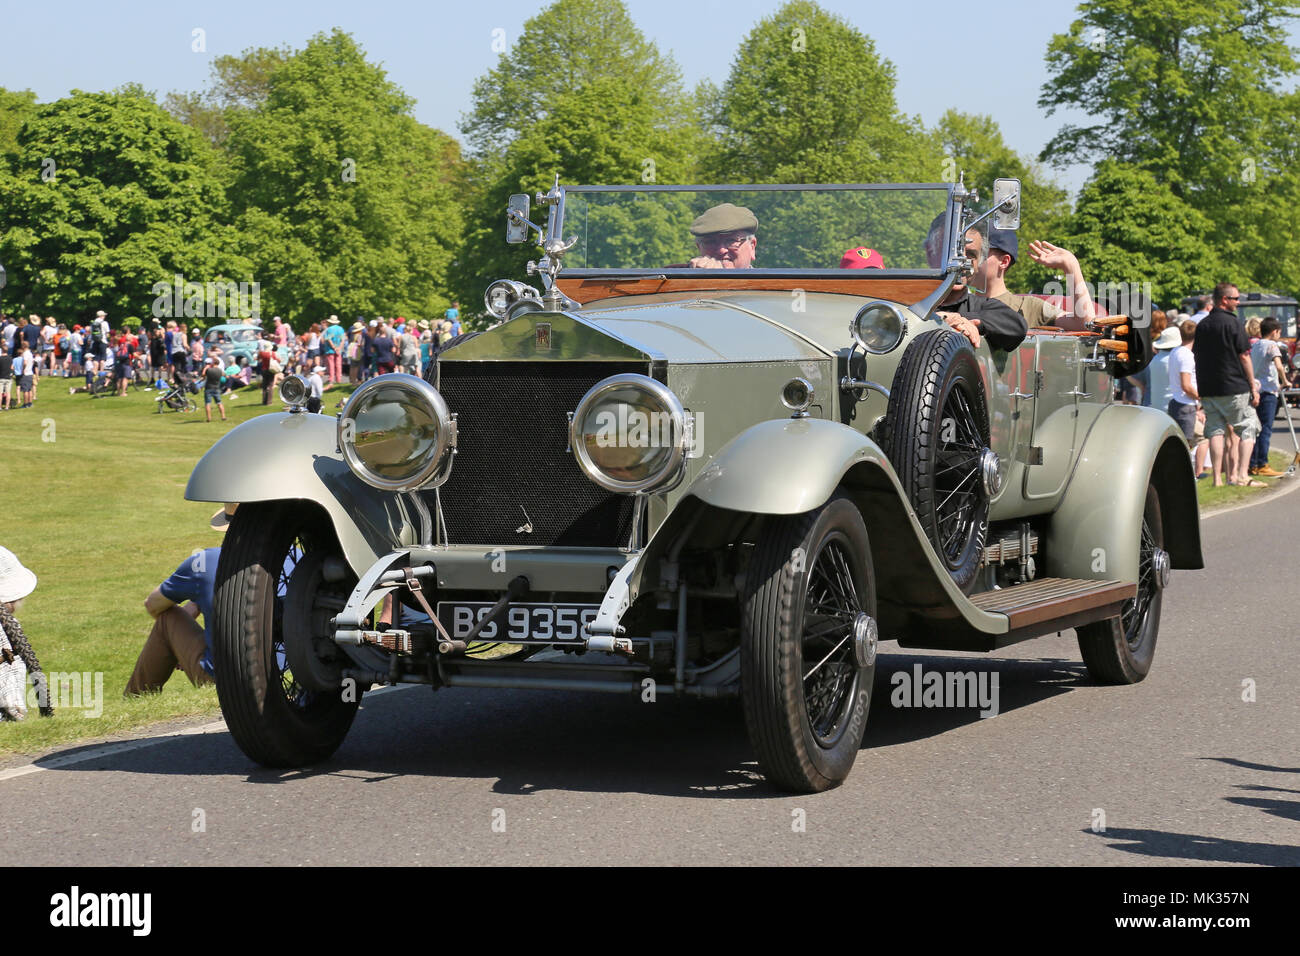 1924 Rolls-Royce Silver Ghost Tourer. Chestnut Sunday, 6th May 2018. Bushy Park, Hampton Court, London Borough of Richmond upon Thames, England, Great Britain, United Kingdom, UK, Europe. Vintage and classic vehicle parade and displays with fairground attractions and military reenactments. Credit: Ian Bottle/Alamy Live News Stock Photo